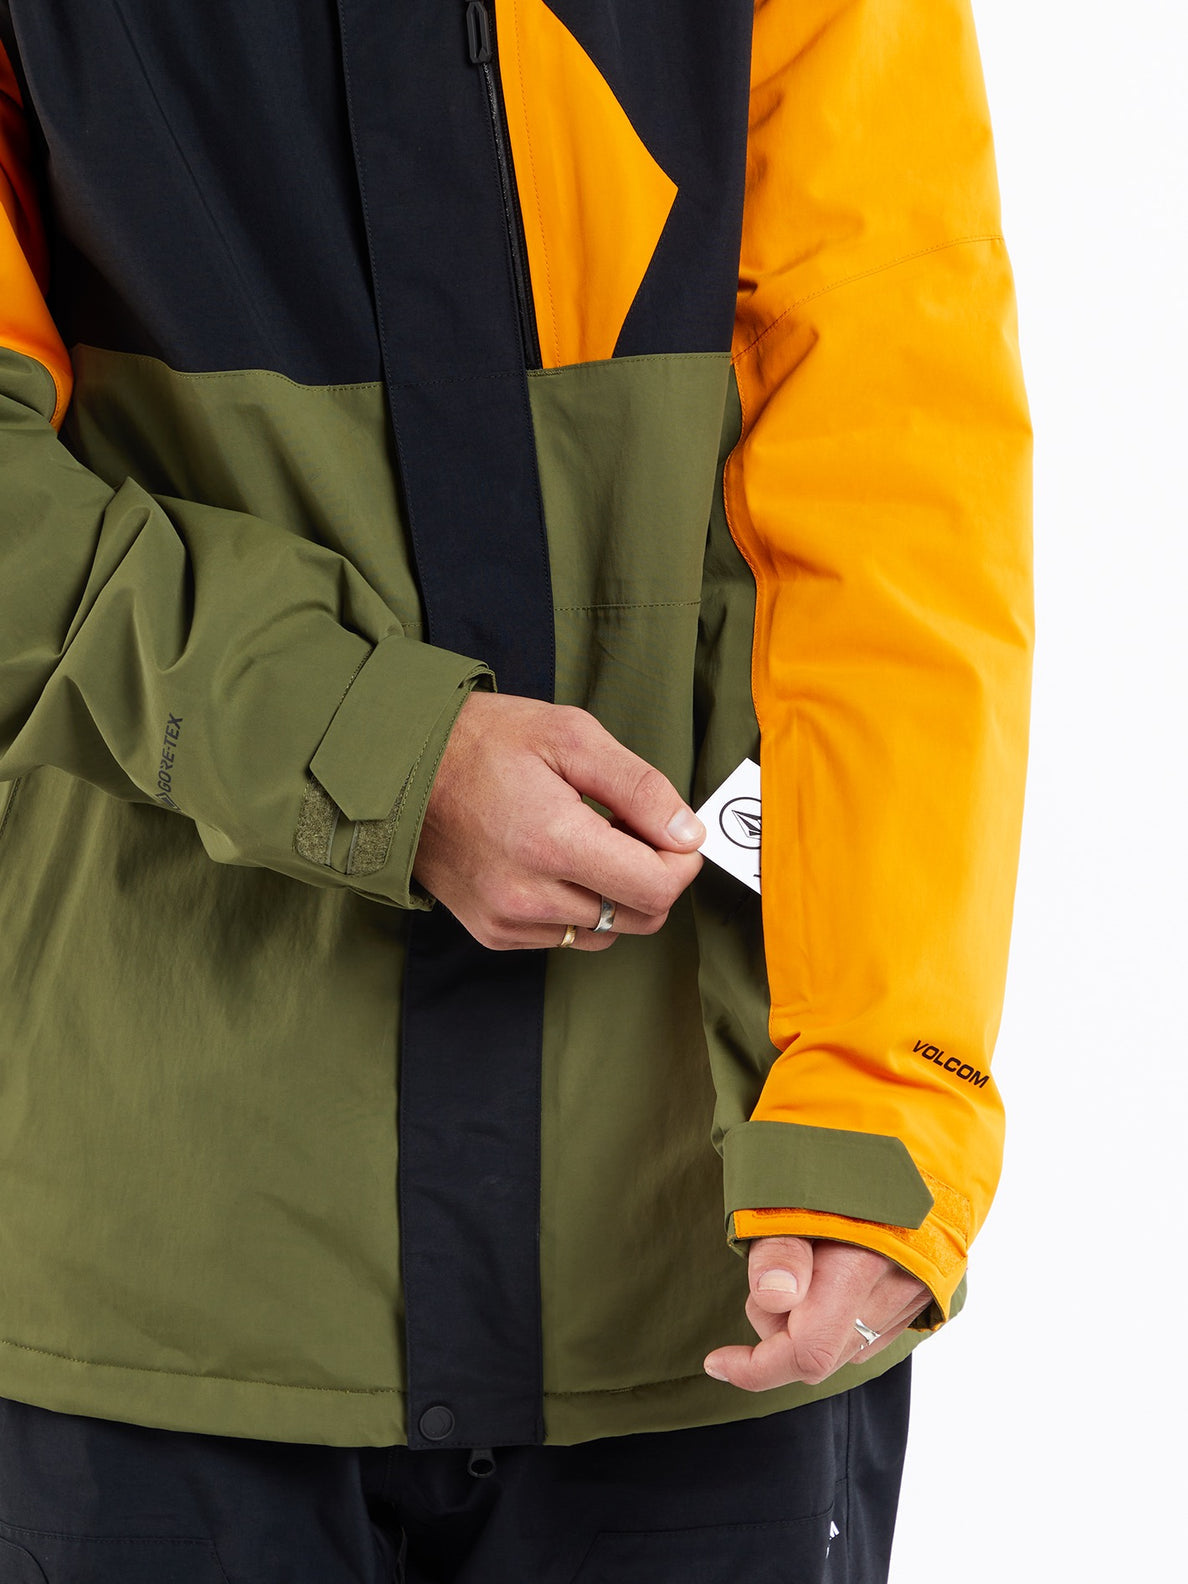 Mens L Insulated Gore-Tex Jacket - Gold – Volcom Japan